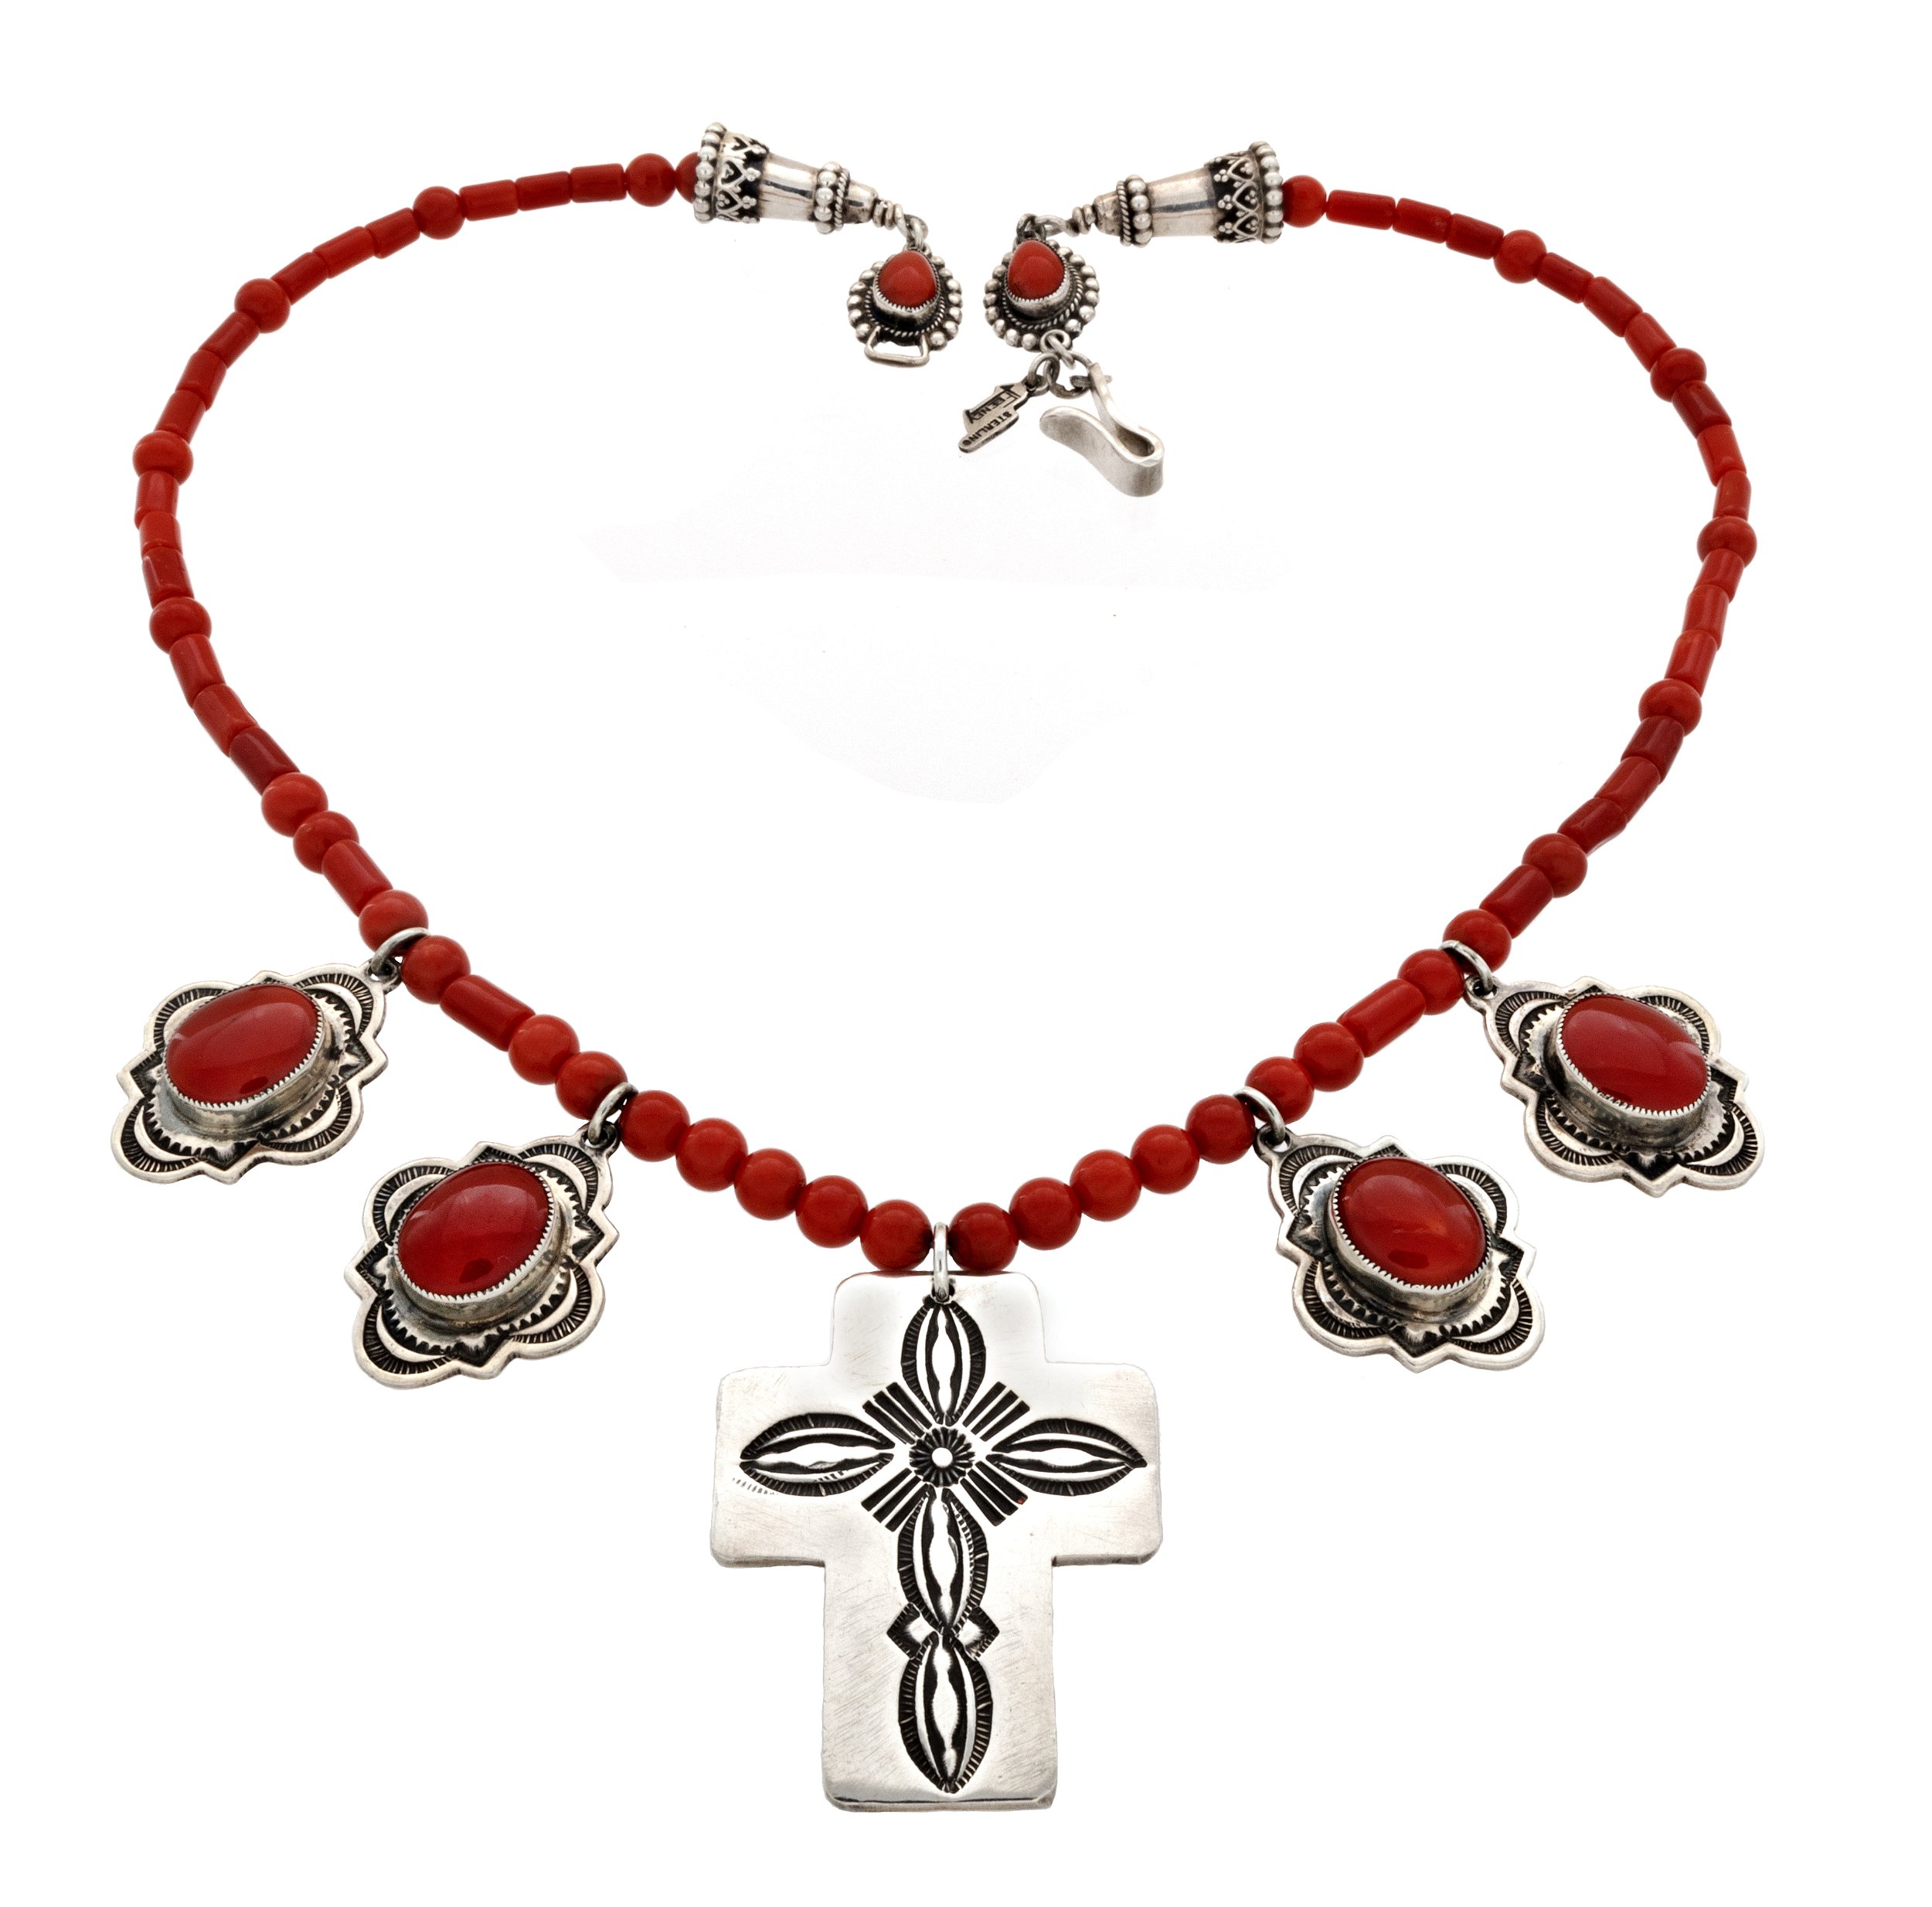 Coral Beaded Necklace - Silver Stamped Cross With 4 Oval Cabochons With Ornate Stamped Bezel Edges